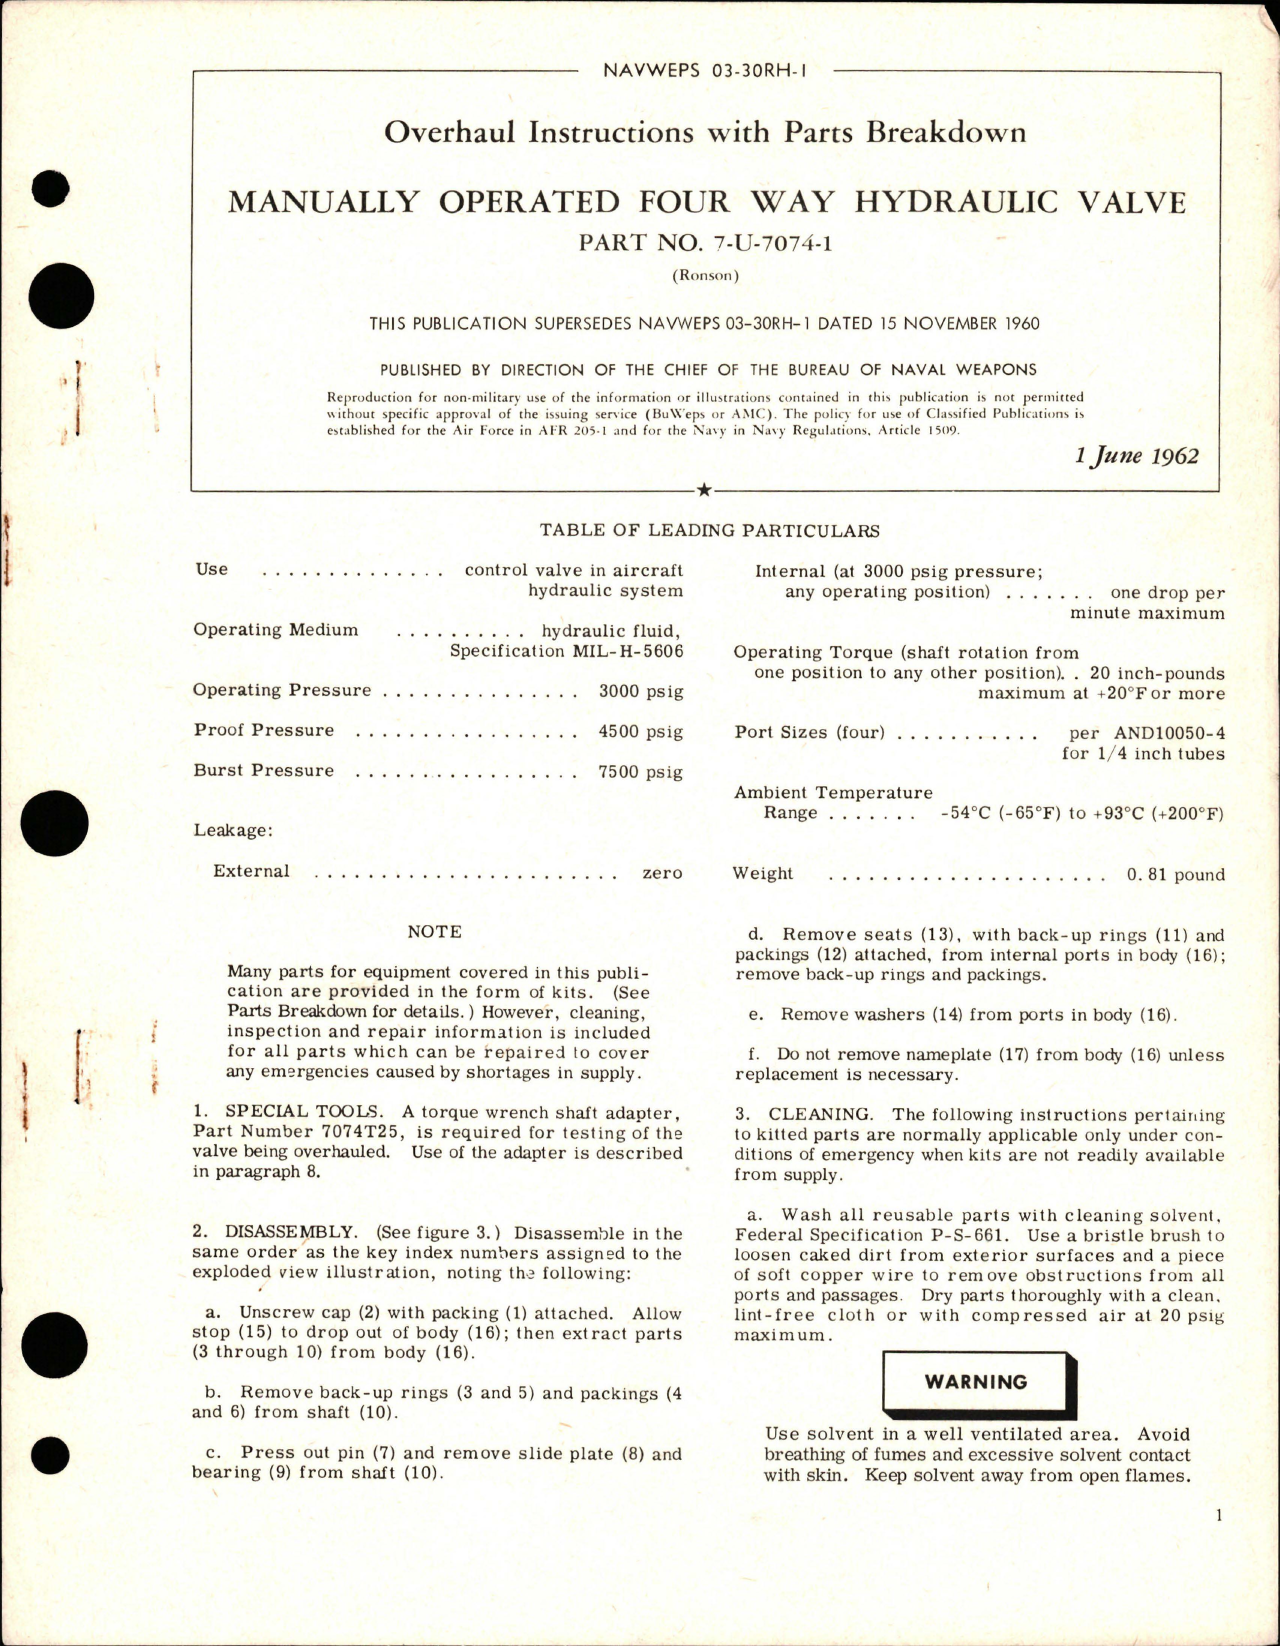 Sample page 1 from AirCorps Library document: Overhaul Instructions with Parts Breakdown for Manually Operated Four Way Hydraulic Valve - Part 7-U-7074-1